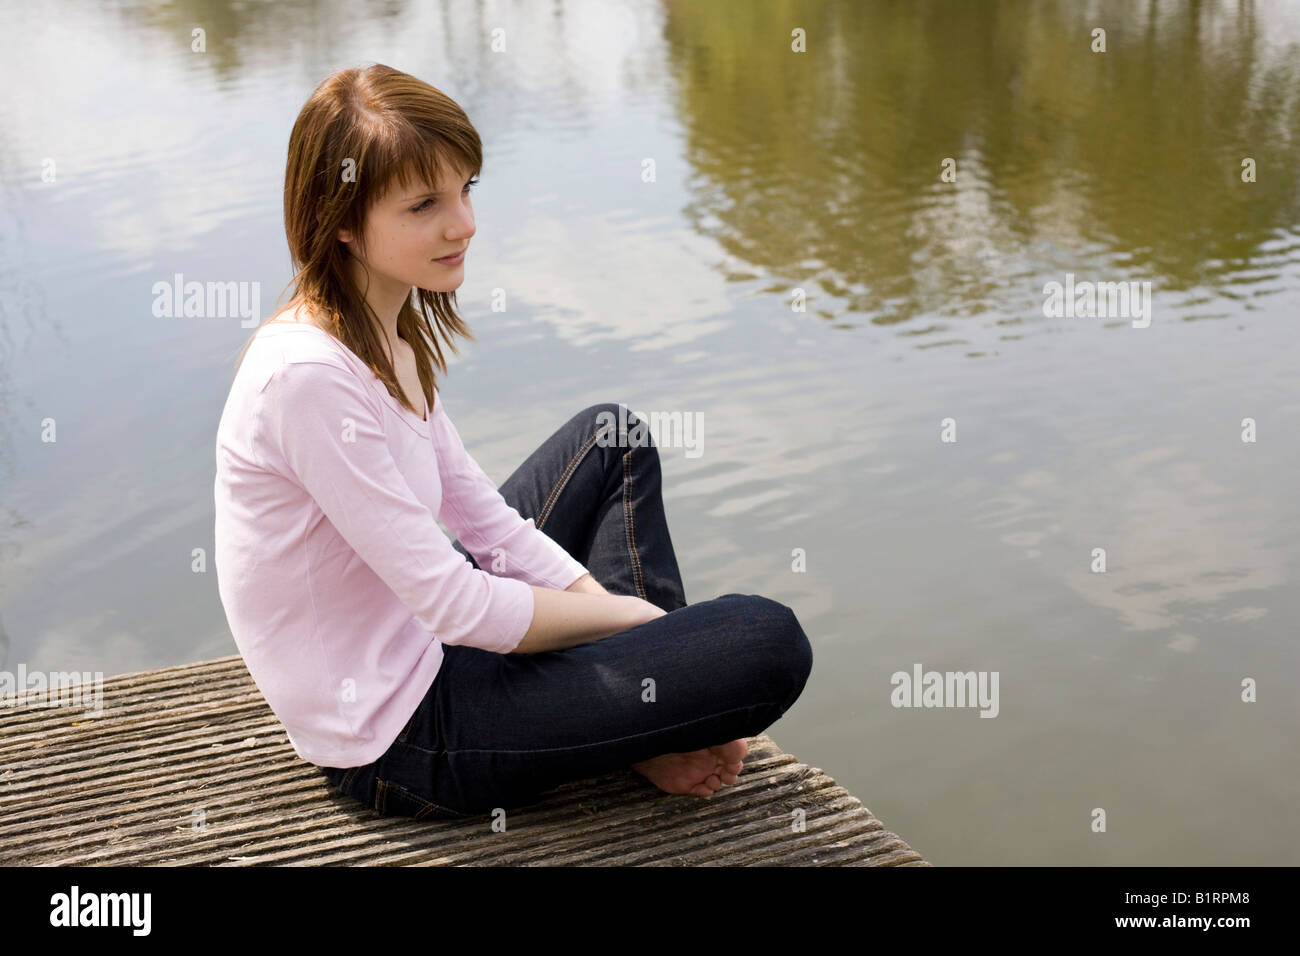 Young woman sitting on a jetty, wooden dock, looking at the water Stock Photo